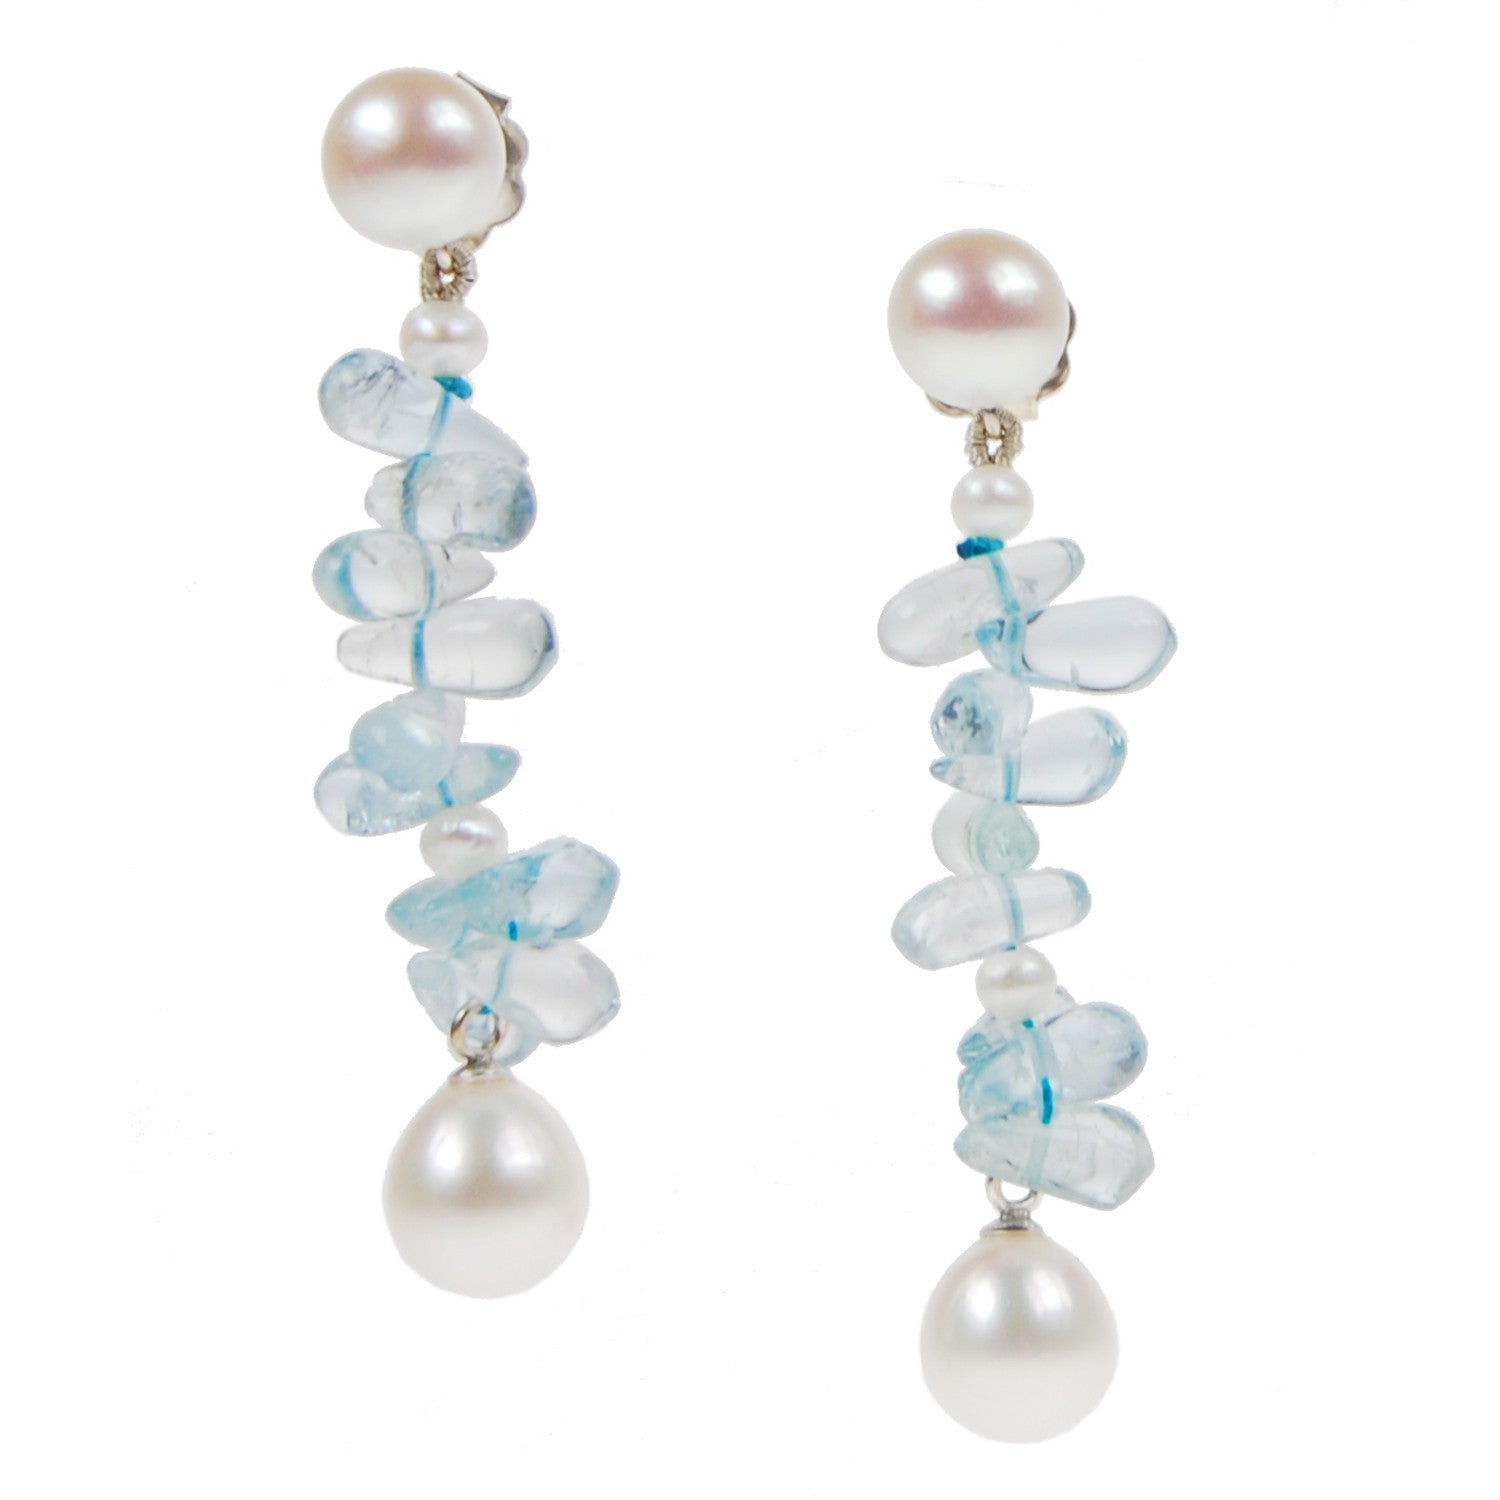 Long 'Twinkling Light' Earrings in White and Aquamarine